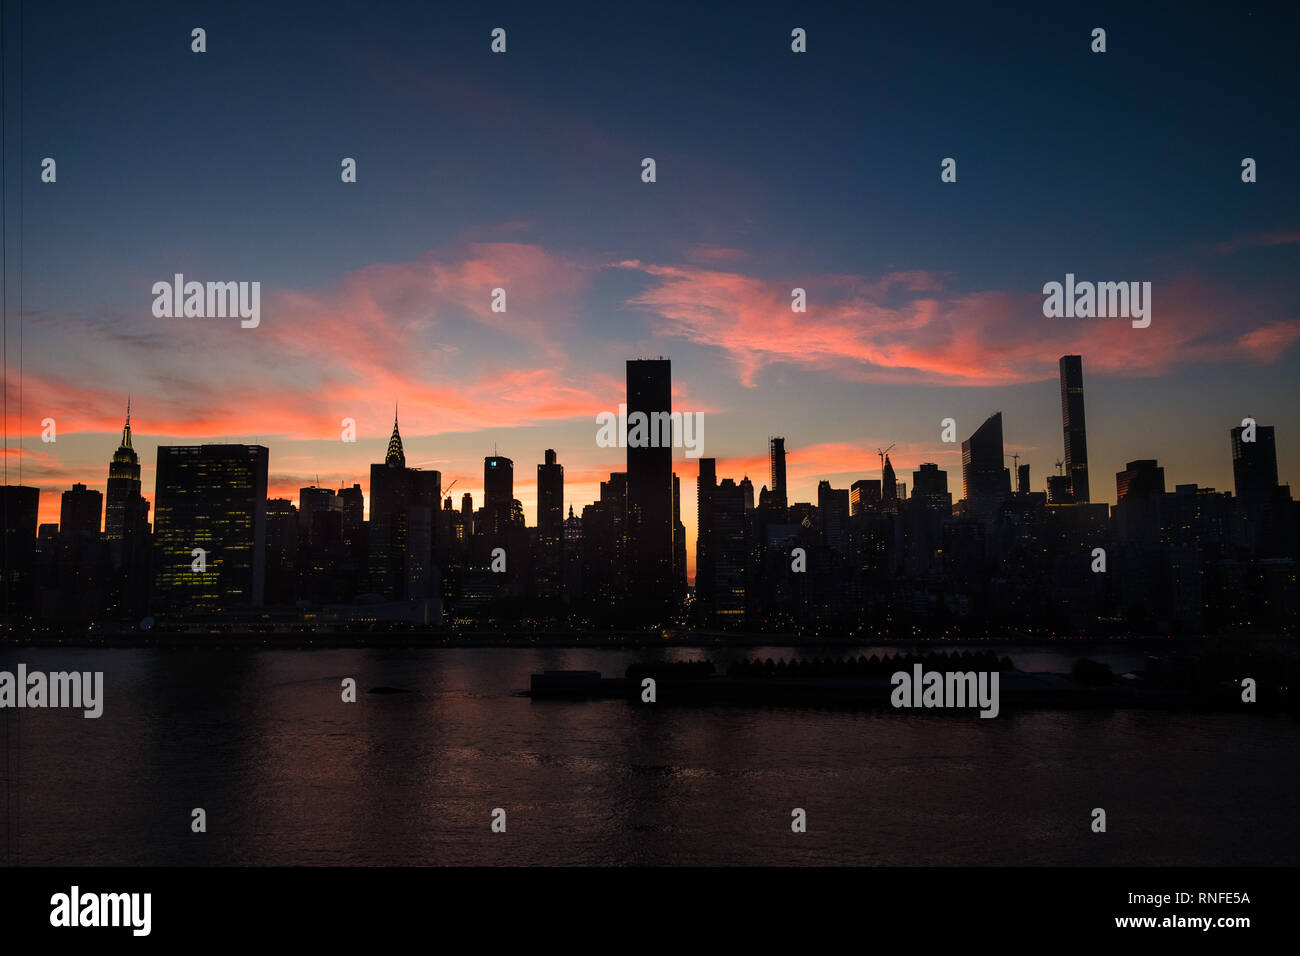 A glowing sunset over the Manhattan skyline, as seen from Long Island City, Queens Stock Photo